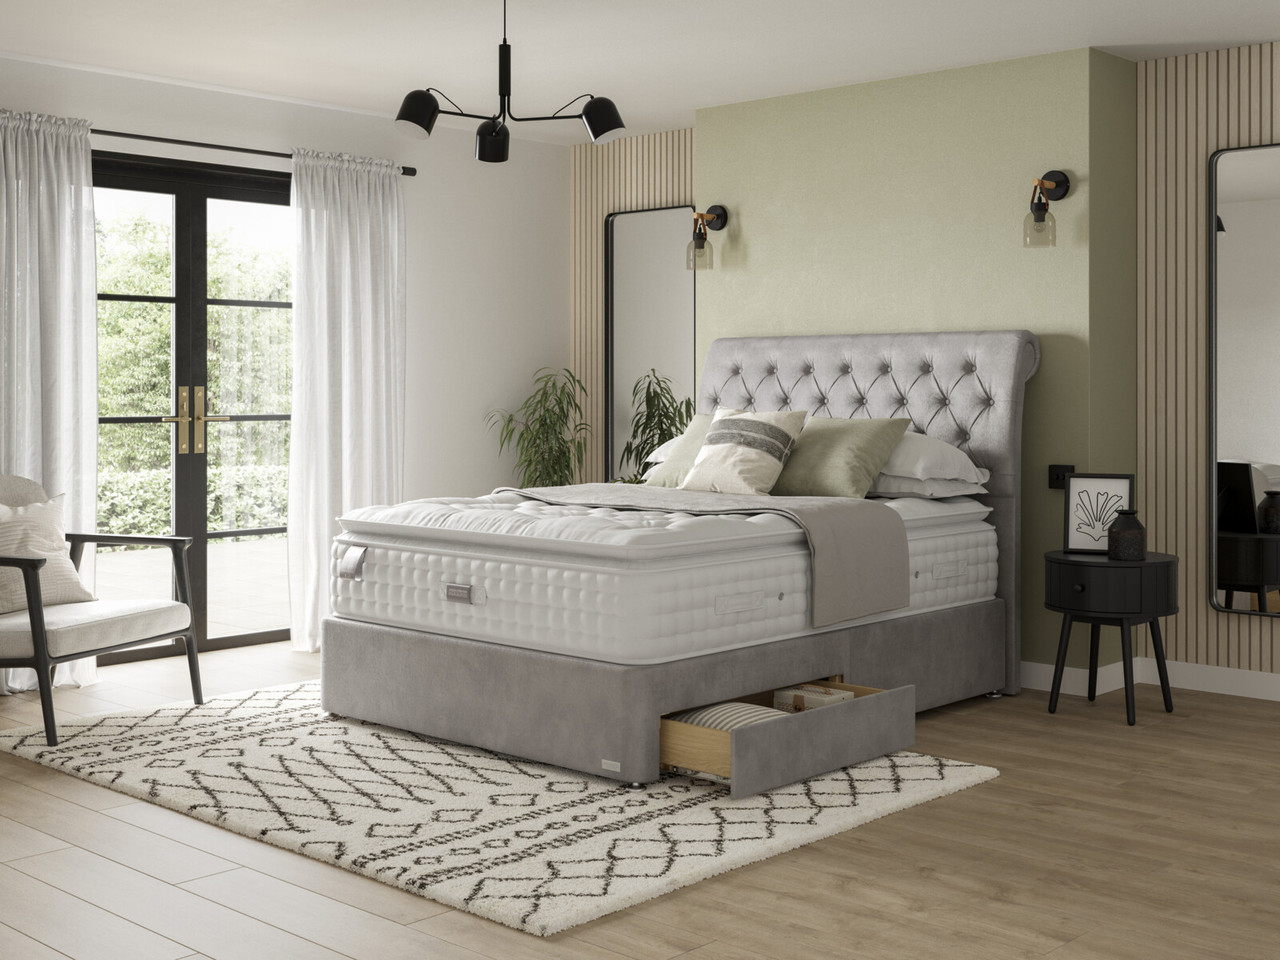 Staples And Co Artisan Deluxe Divan Bed Set On Glides Double Castello Silver Grey